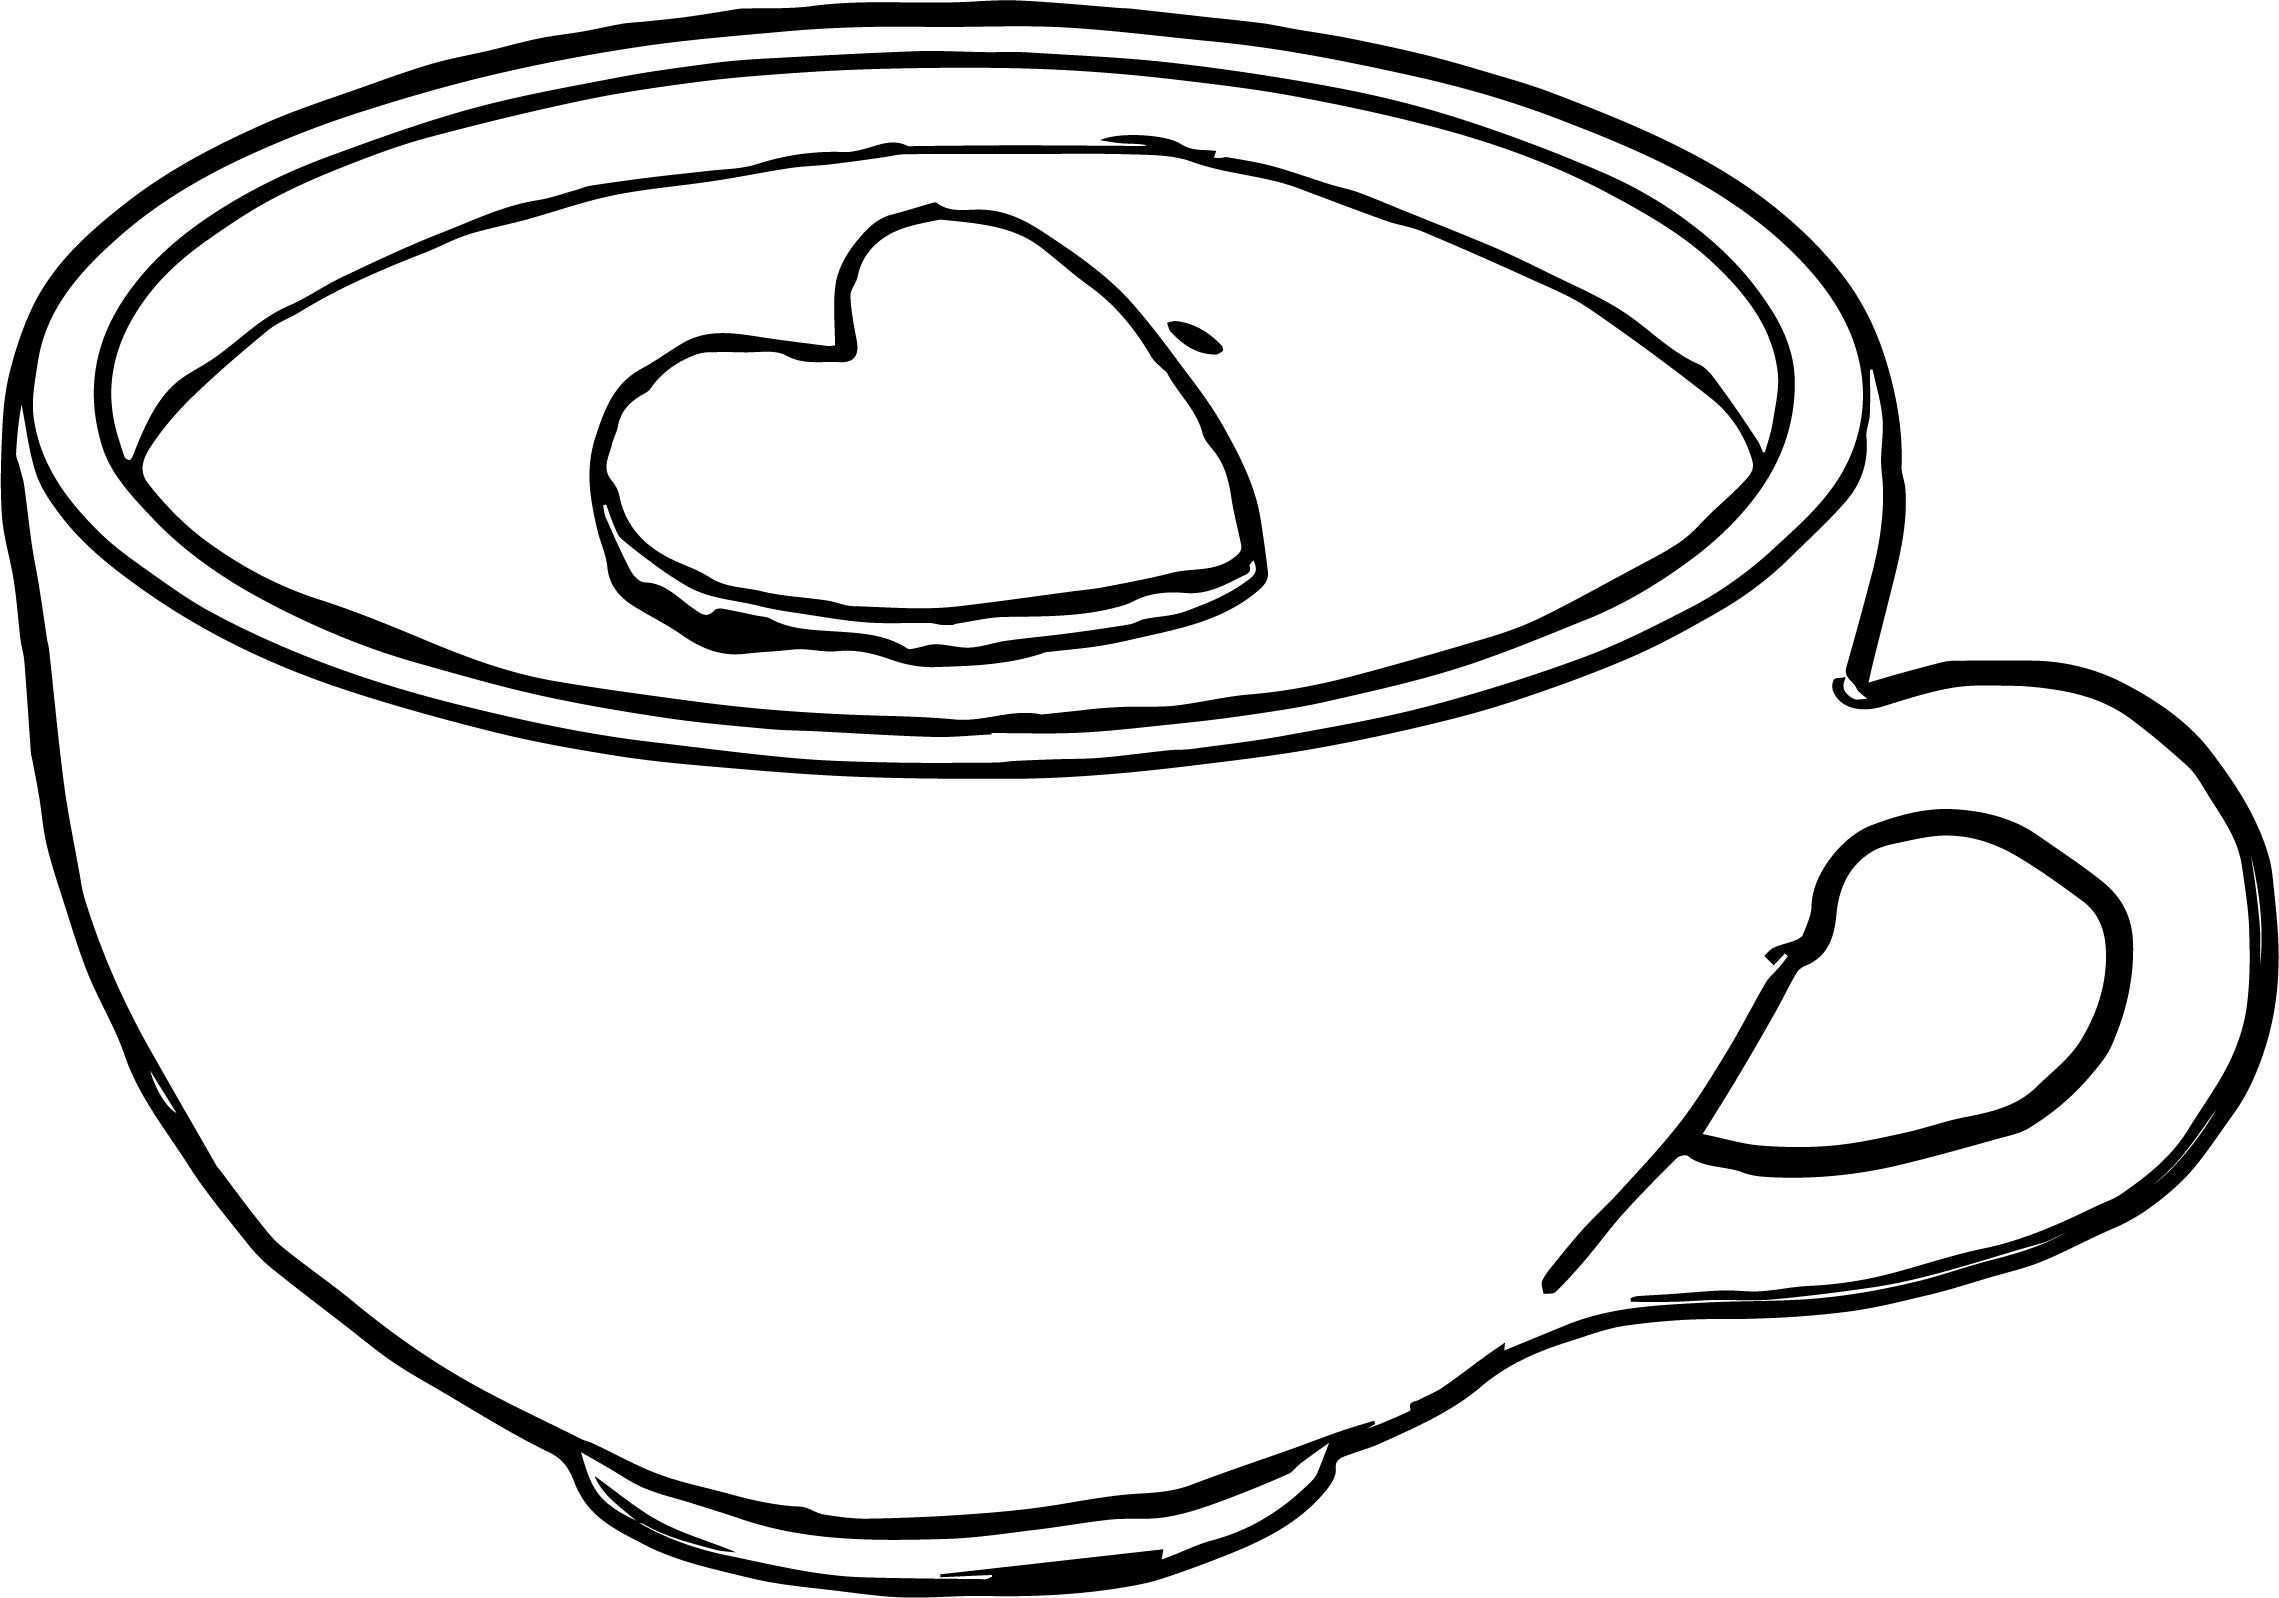 Coffee Mug Drawing | Free download on ClipArtMag